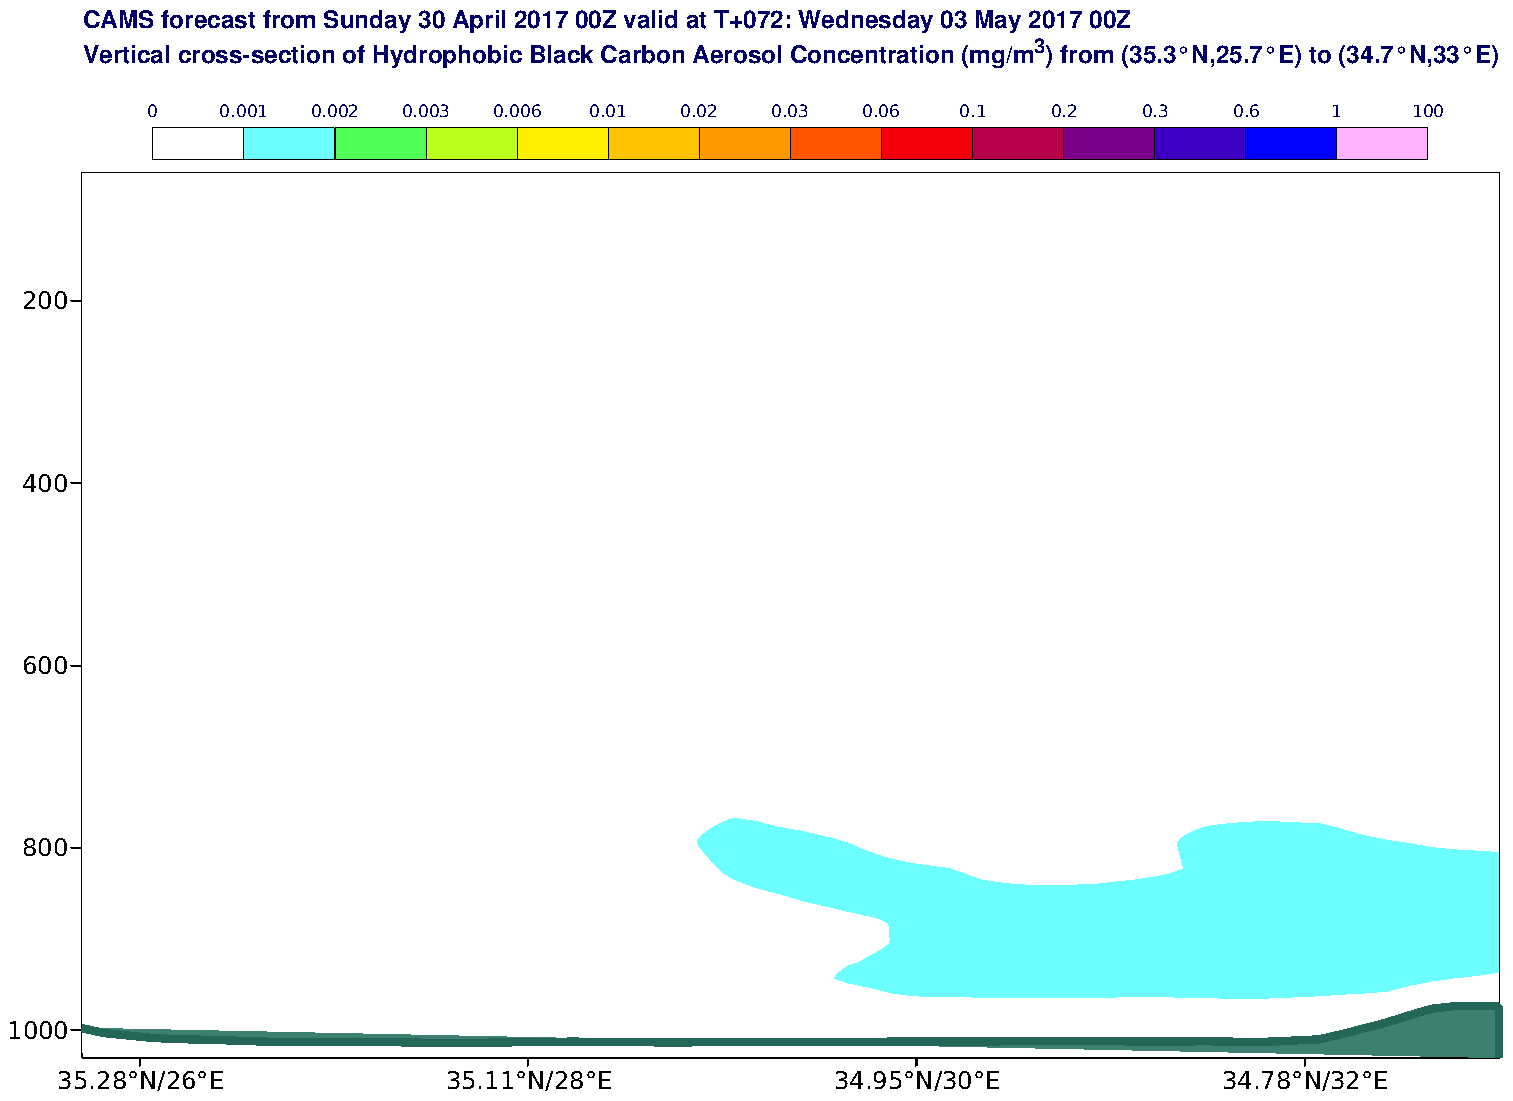 Vertical cross-section of Hydrophobic Black Carbon Aerosol Concentration (mg/m3) valid at T72 - 2017-05-03 00:00